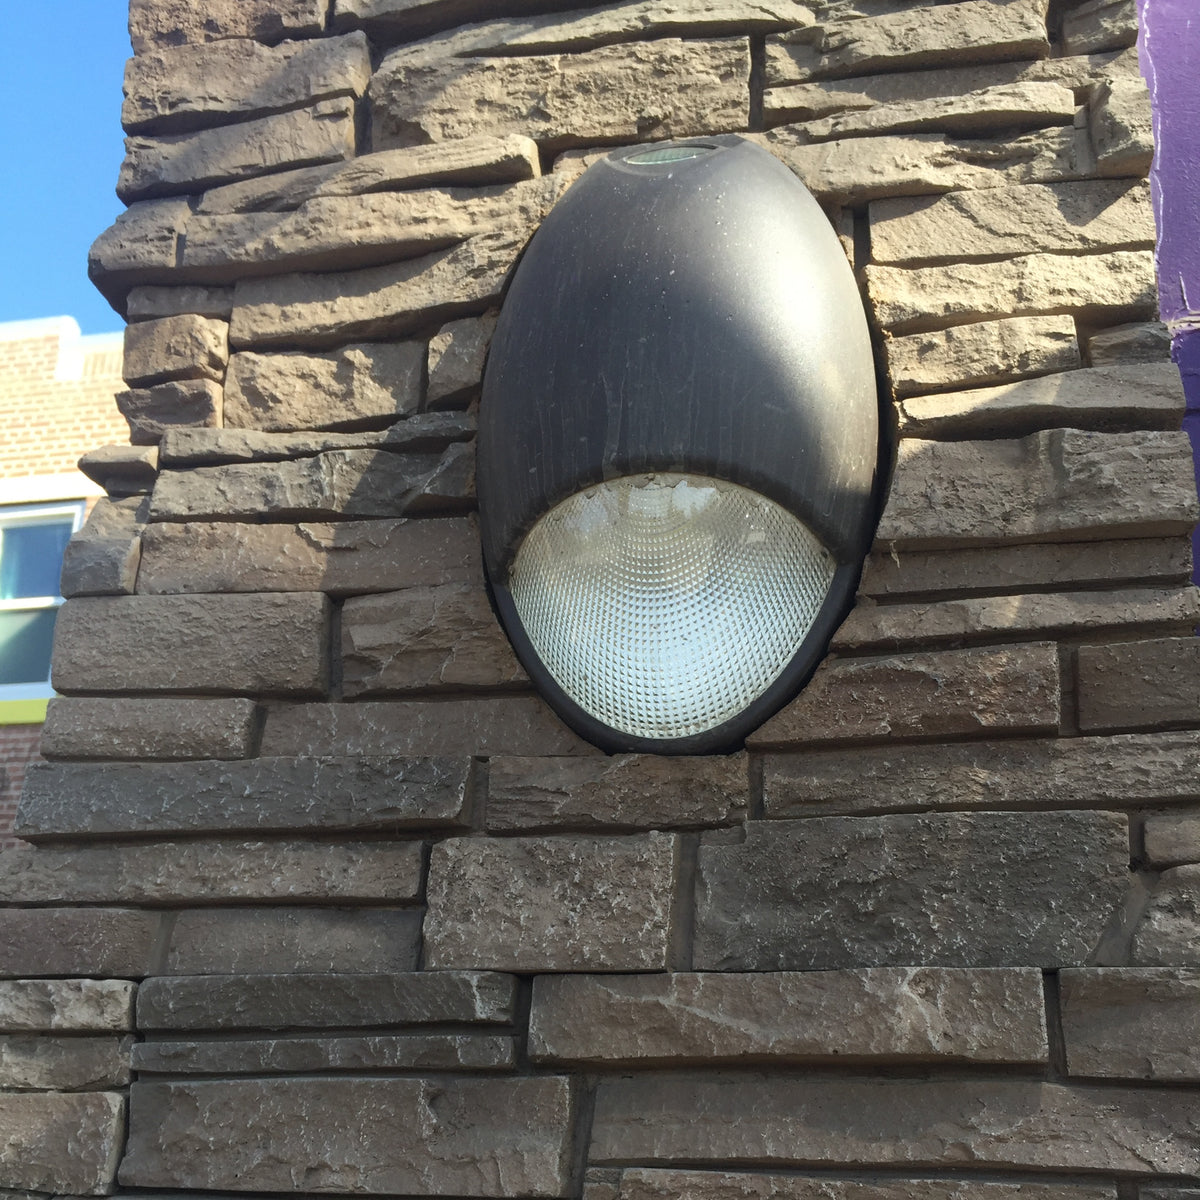 Faux Stacked Stone Panels - Light Brown